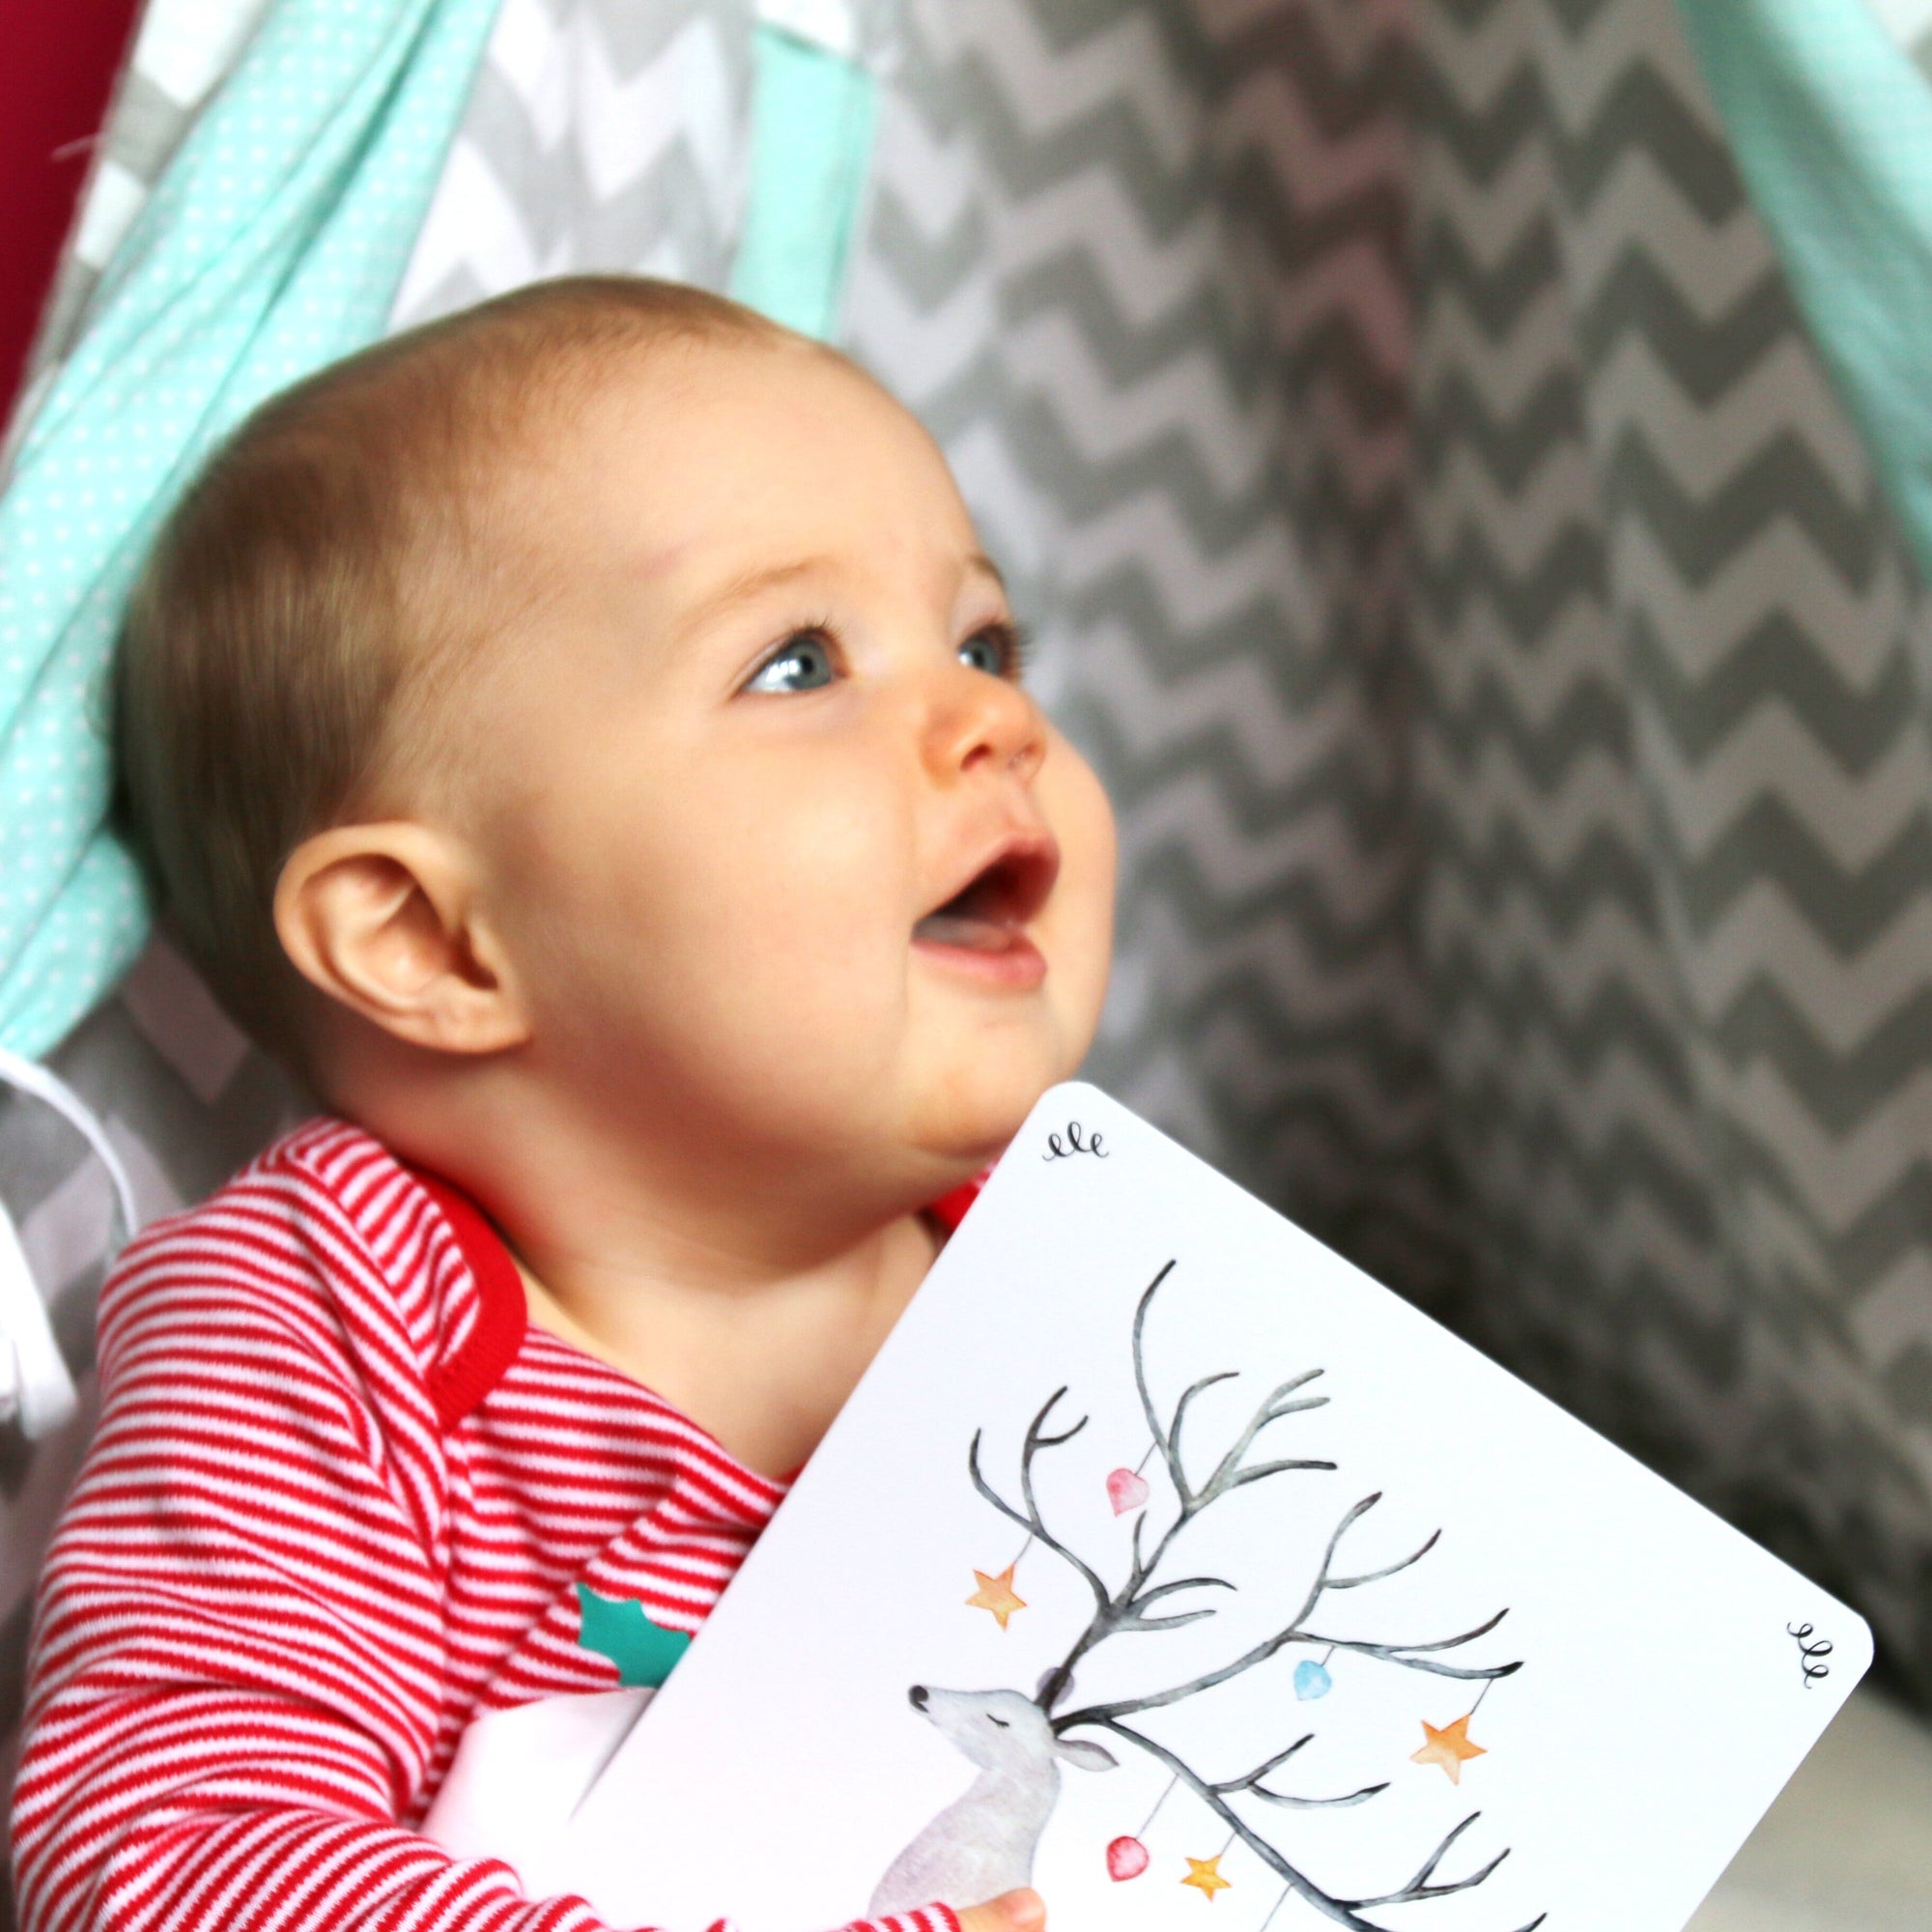 Smiling baby holding a painted reindeer print